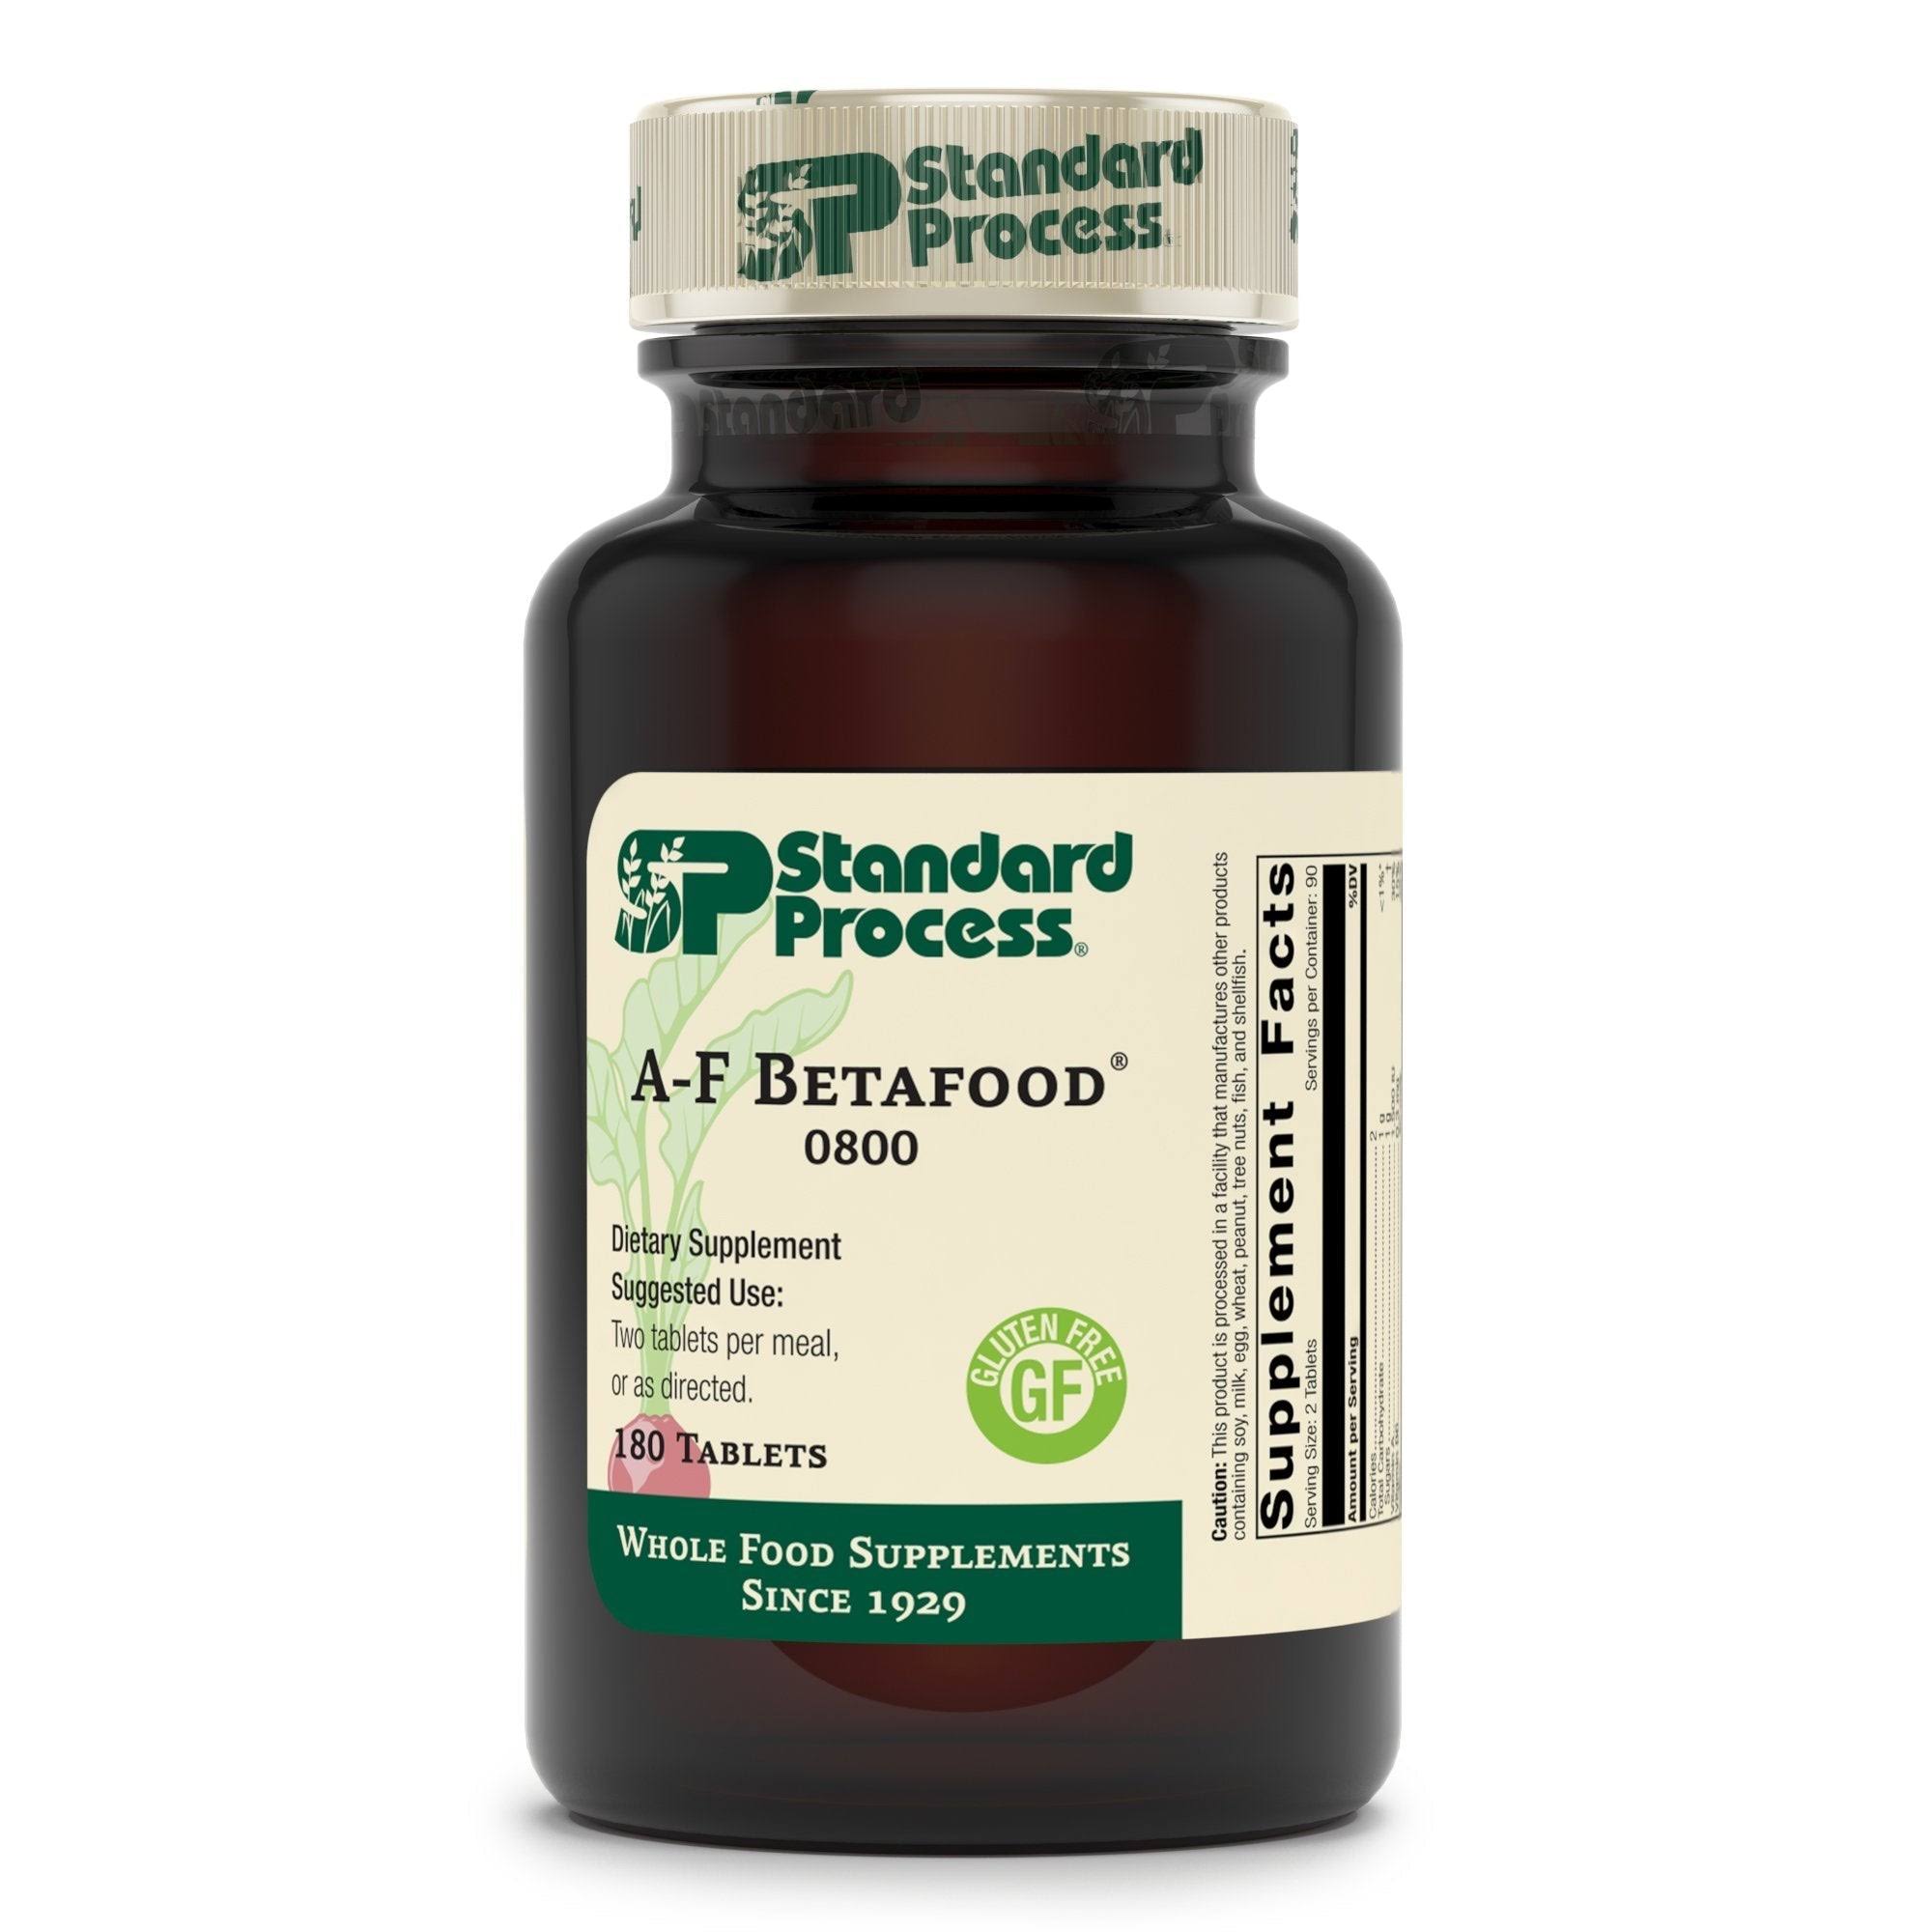 Standard Process A-F Betafood - Gluten-Free Liver Support, Cholesterol Metabolism, and Gallbladder Support Supplement with Vitamin A, Iodine, Vitamin